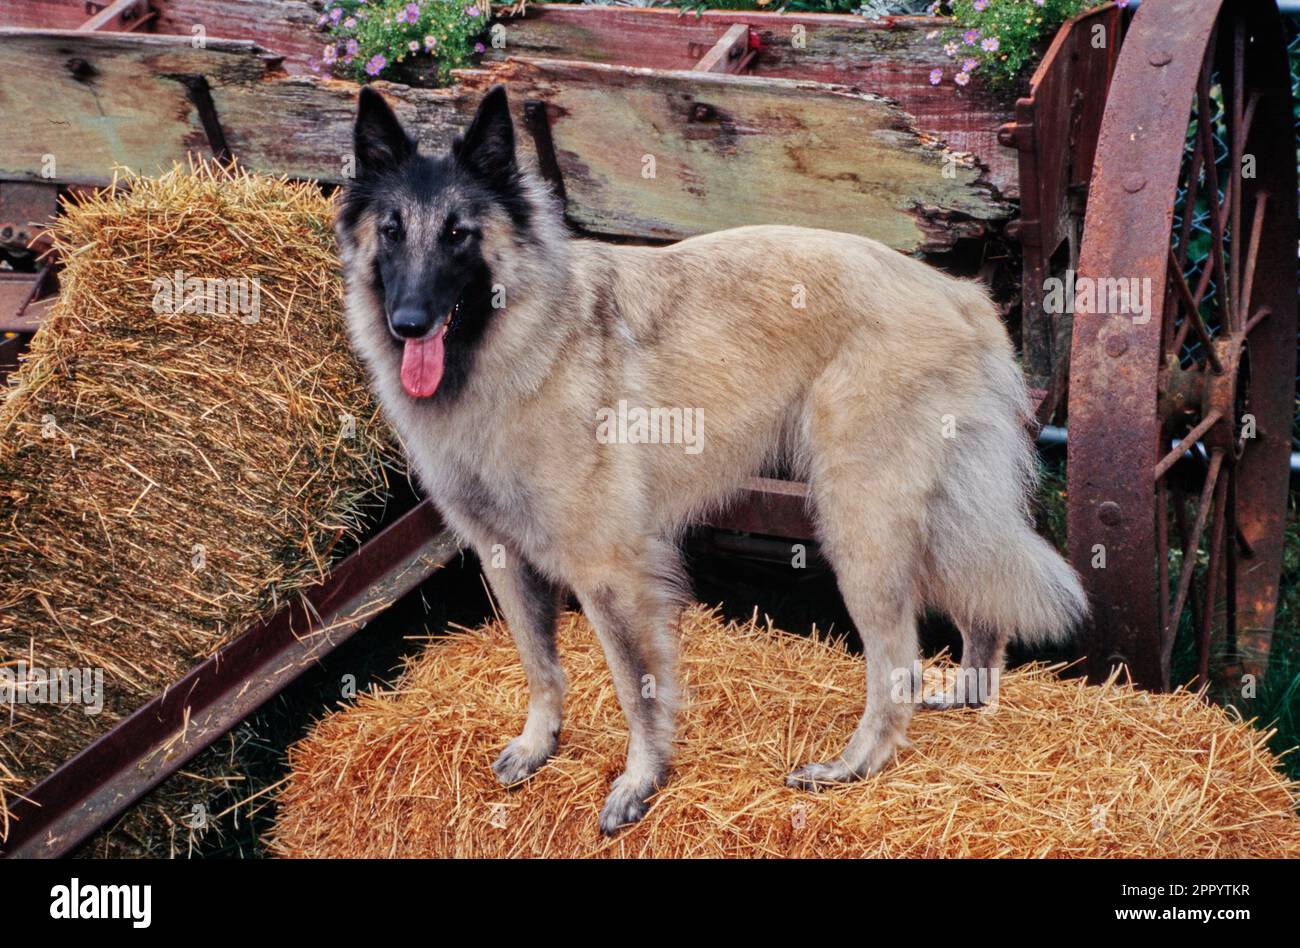 Belgian Shepherd standing outside on haystack near wheel of antique metal farm cart with tongue out Stock Photo